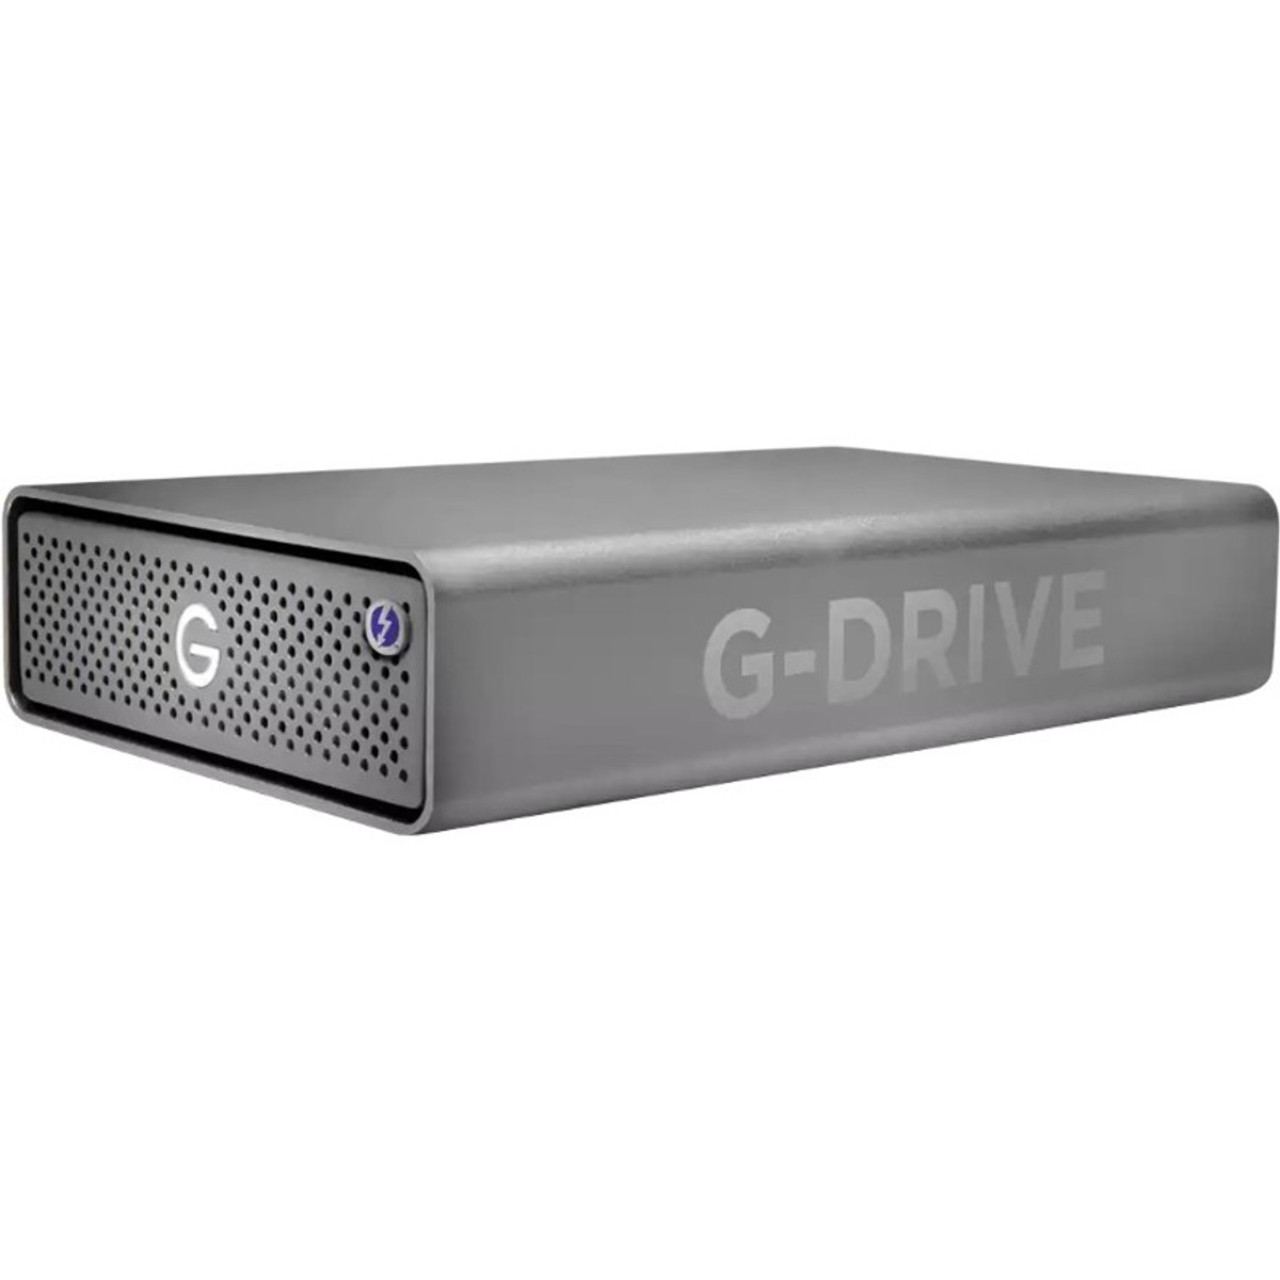 SanDisk Professional G-DRIVE Pro Studio SDPS71F-007T-NBAAD 7.68 TB Desktop Solid State Drive - External - PCI Express NVMe - Space Gray - SDPS71F-007T-NBAAD